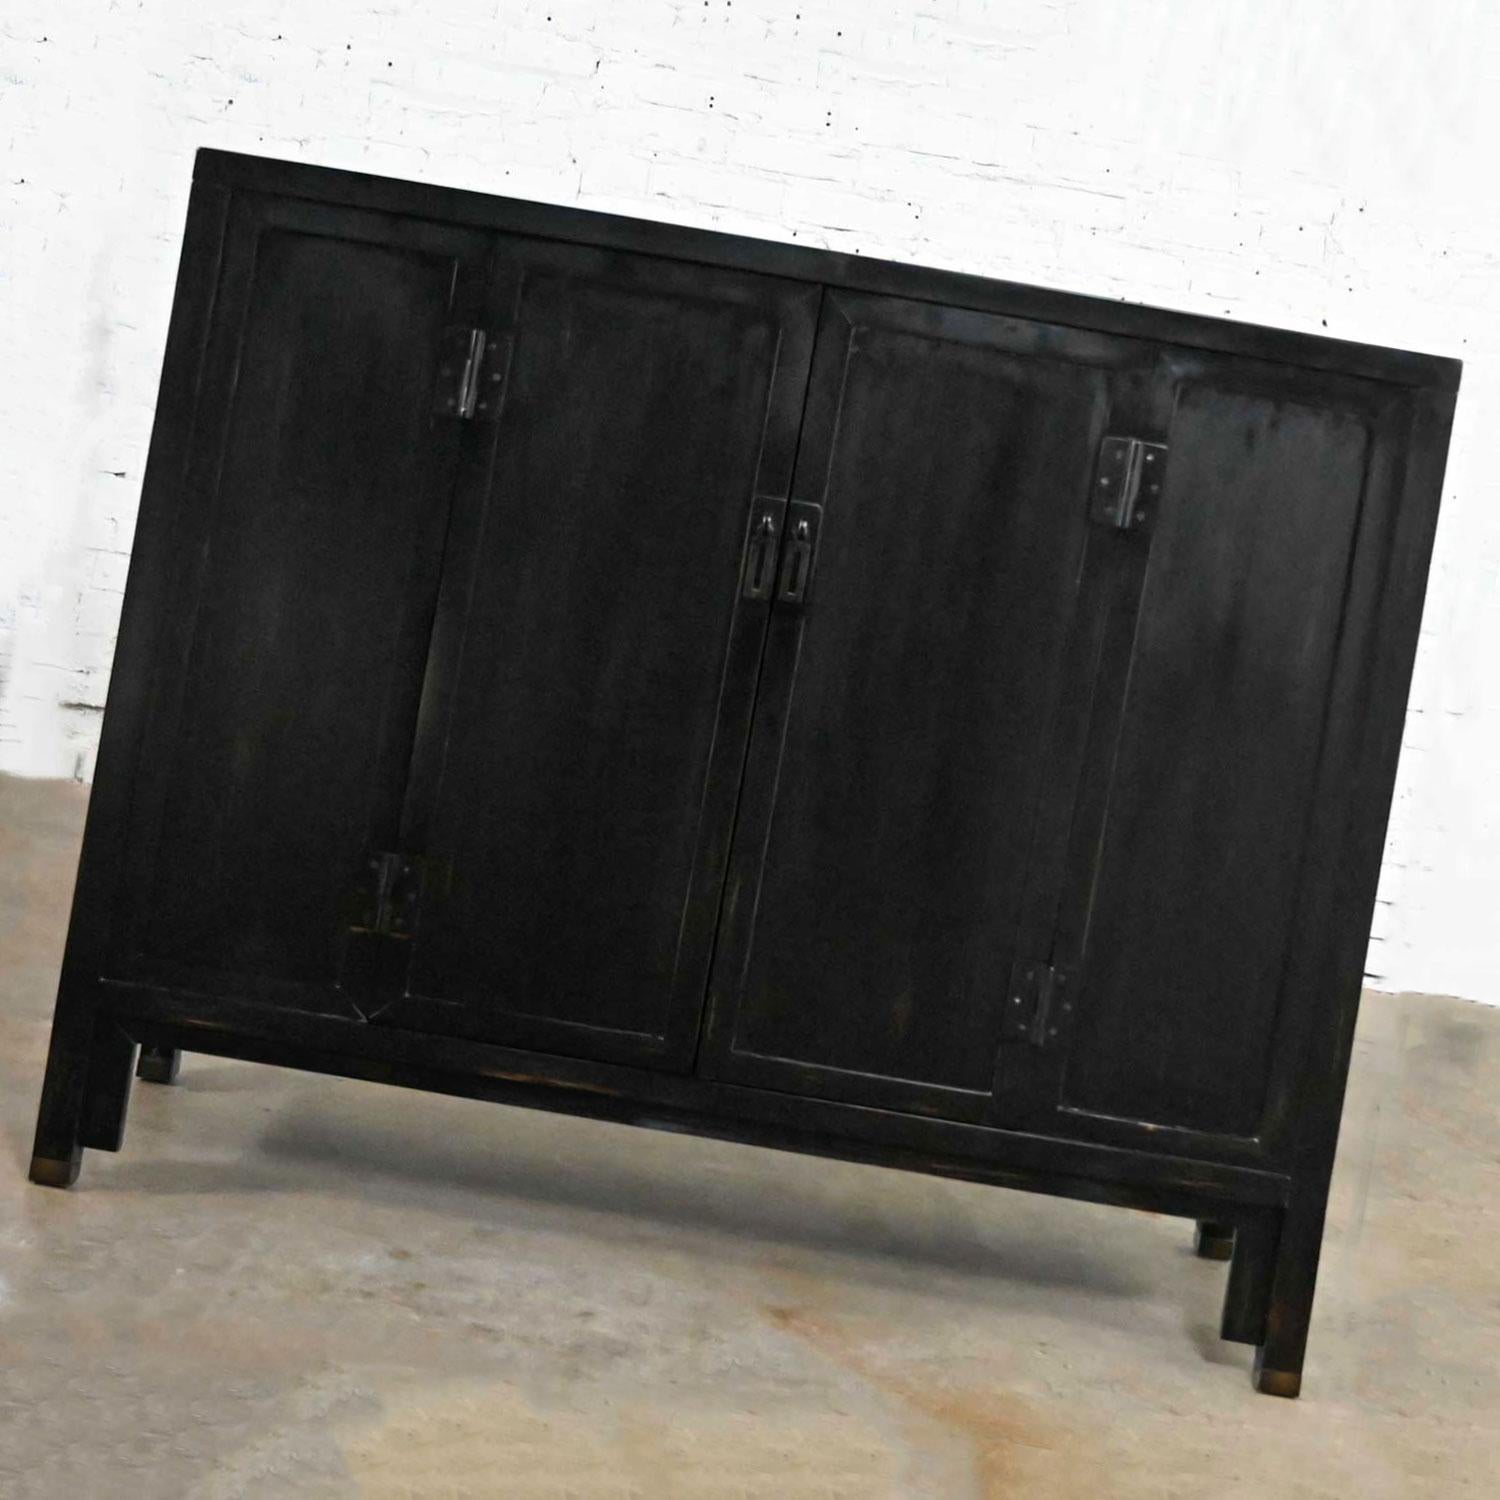 Just look at this Awesome Han style bar cabinet or tall console by Baker Furniture! It’s from their Milling Road Collection and is comprised of gorgeous, ebonized hardwood and is adorned with metal hardware and fittings. It is loaded with storage